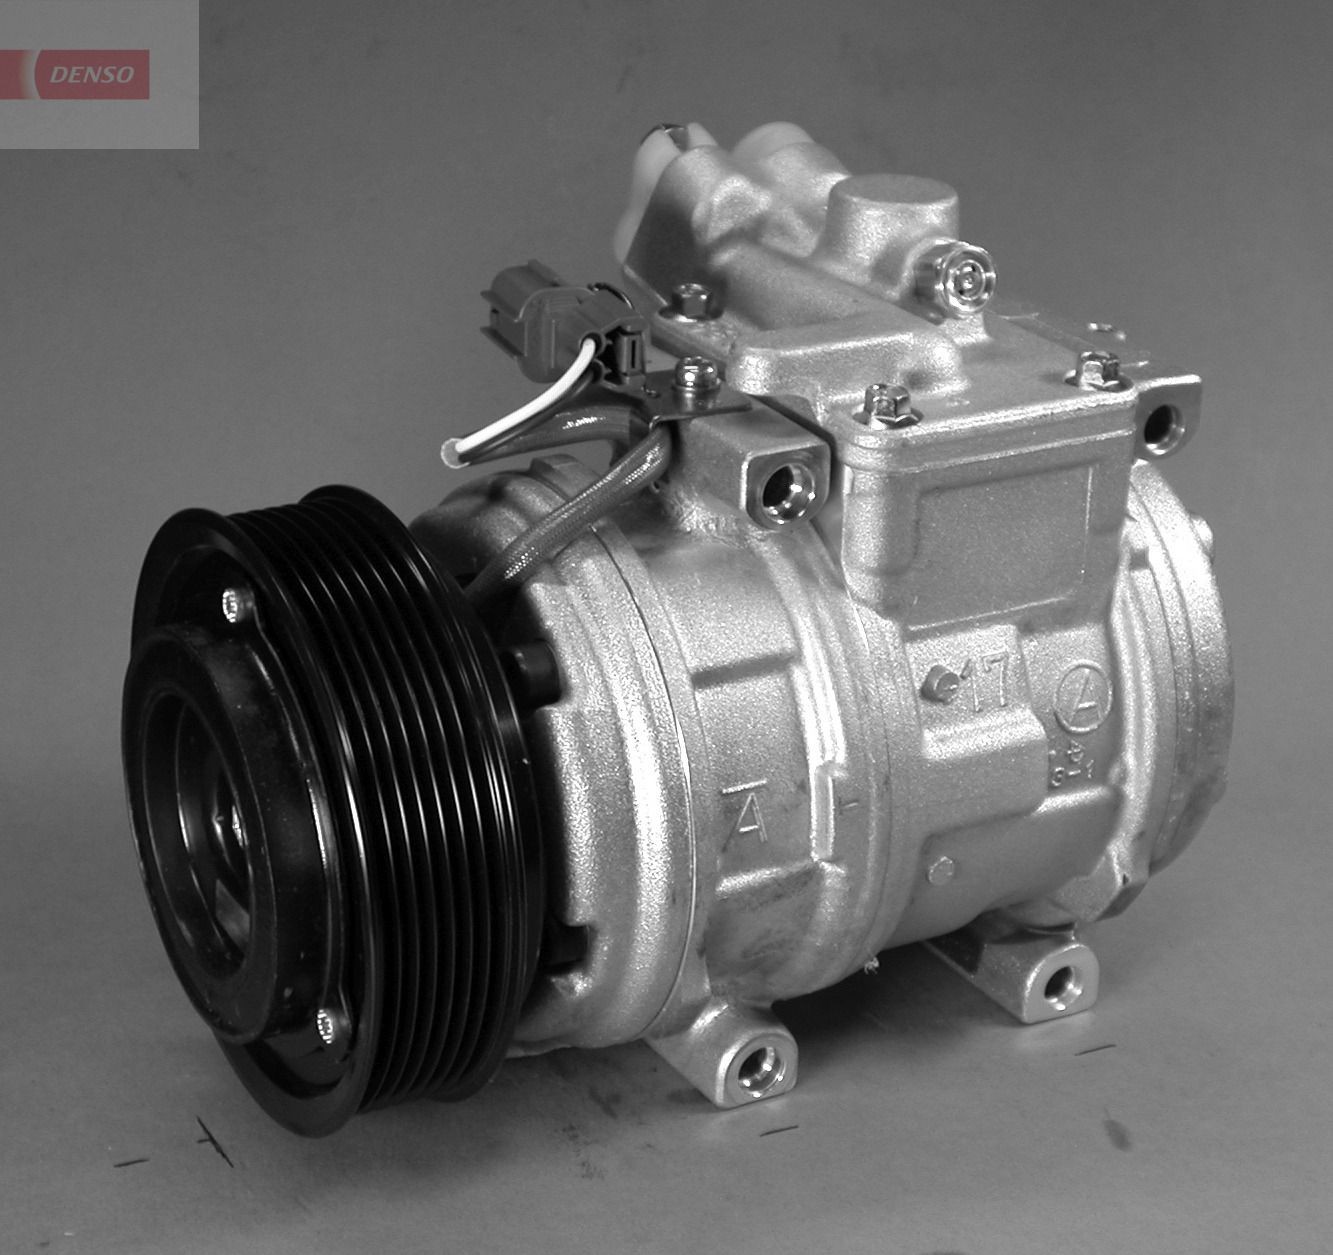 DENSO DCP14006 Air conditioning compressor 10PA17C, 12V, PAG 46, R 134a, with magnetic clutch